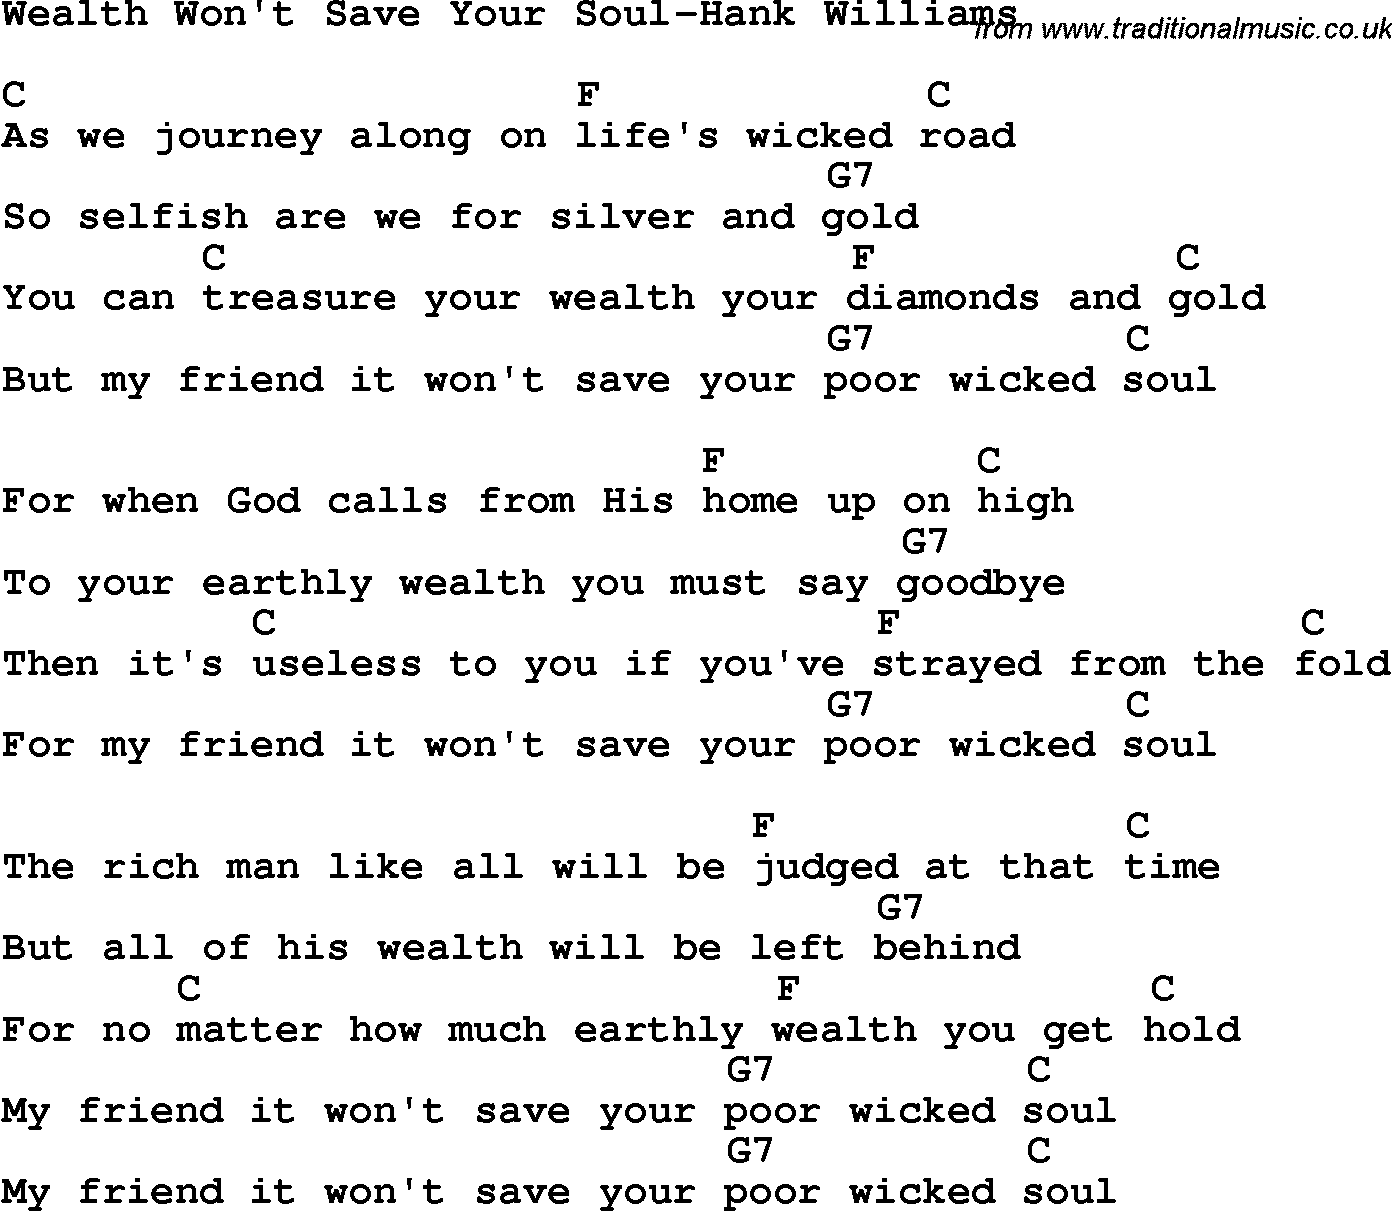 Country, Southern and Bluegrass Gospel Song Wealth Won't Save Your Soul-Hank Williams lyrics and chords